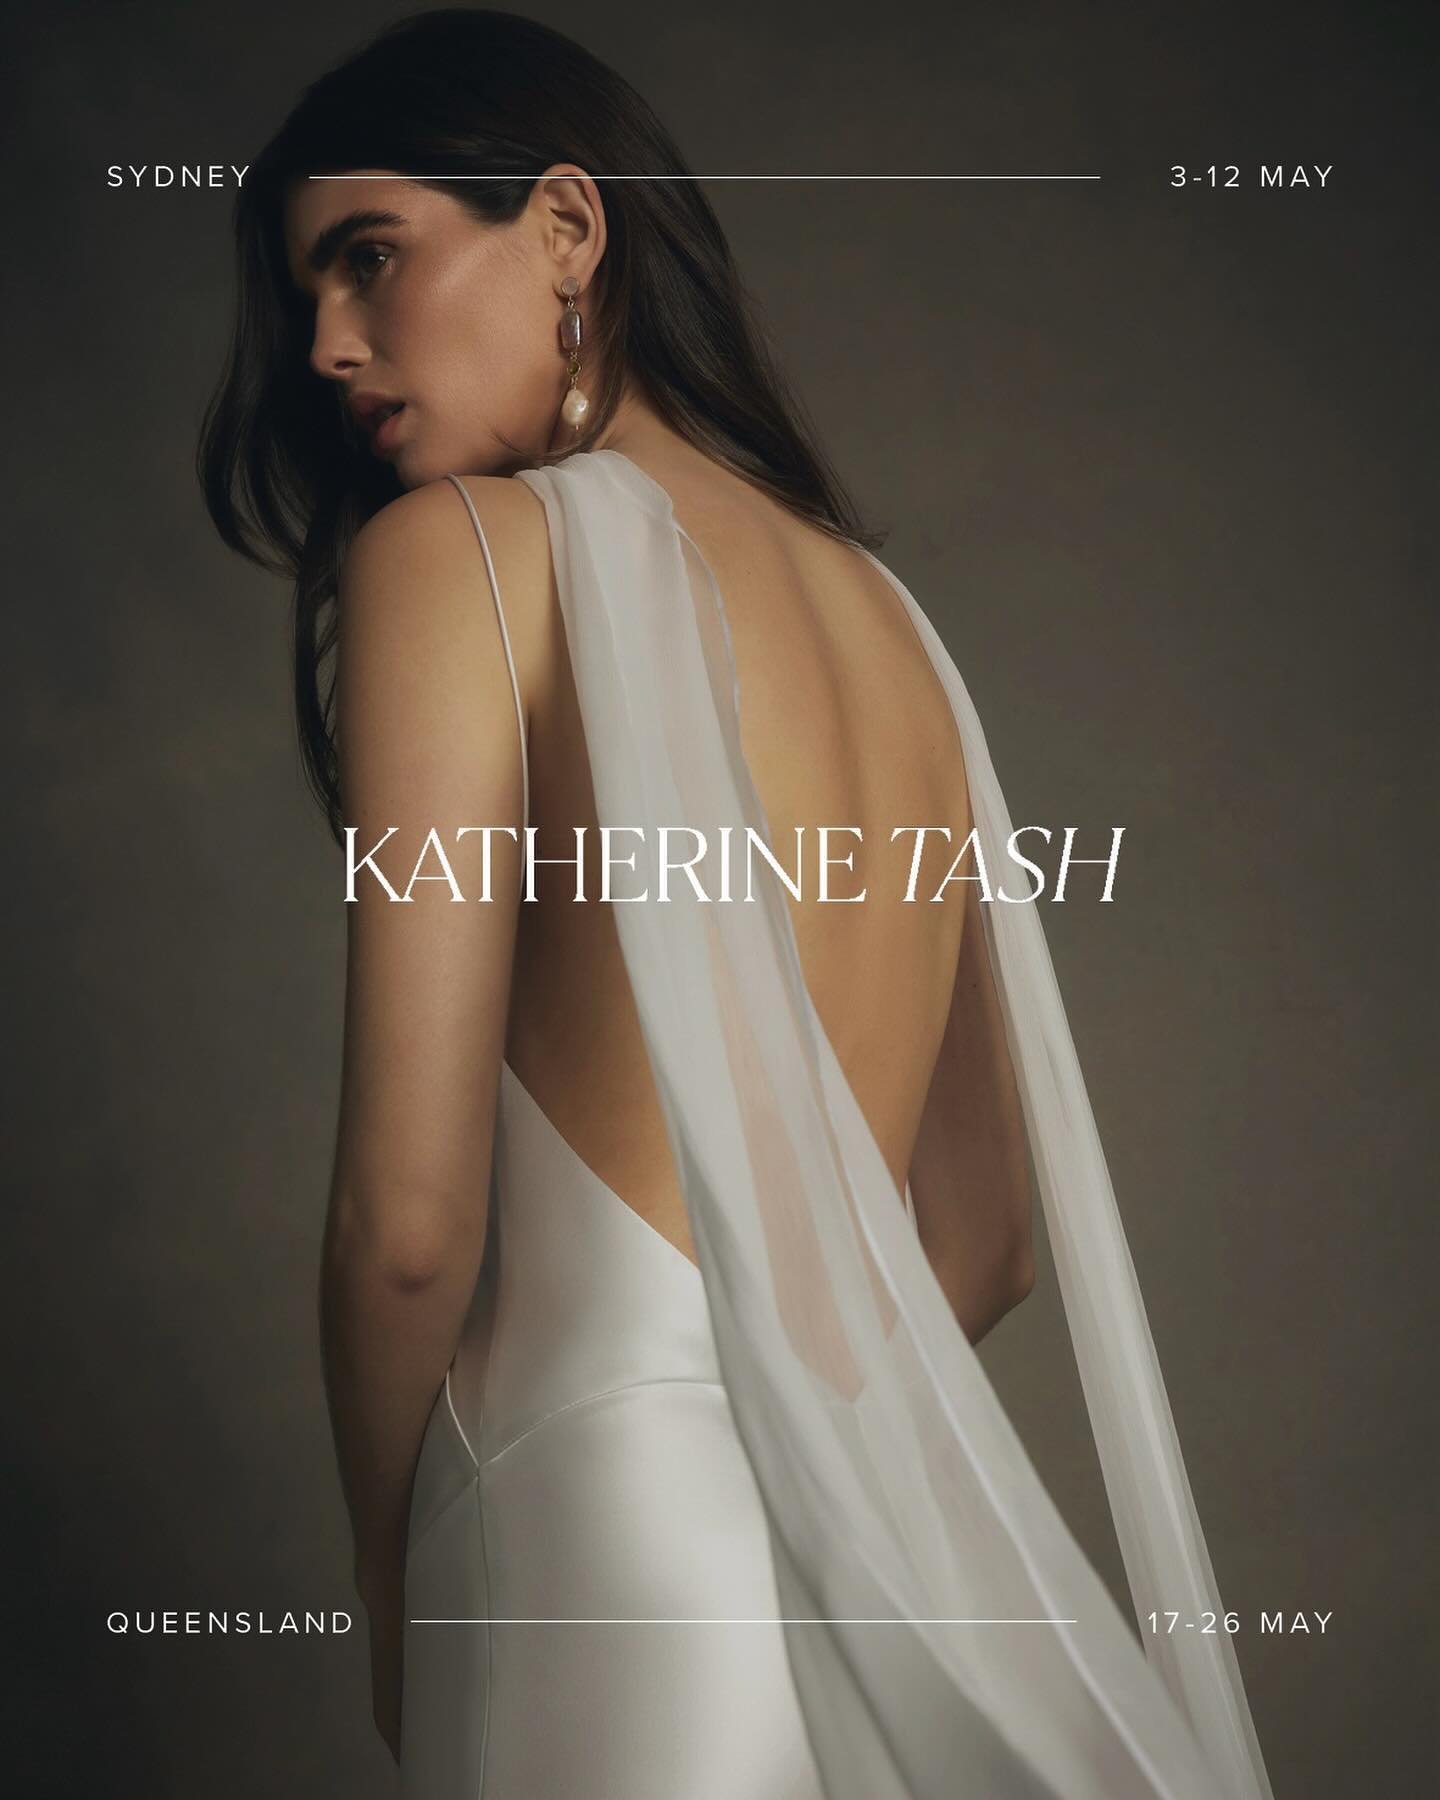 STARTING TOMORROW &mdash;&mdash; The new @katherinetash Paradise &lsquo;25 collection trunk show. In store SYDNEY 3-12 May &amp; QUEENSLAND 17-26 May only. Book an appointment now via the link in our bio to not miss out